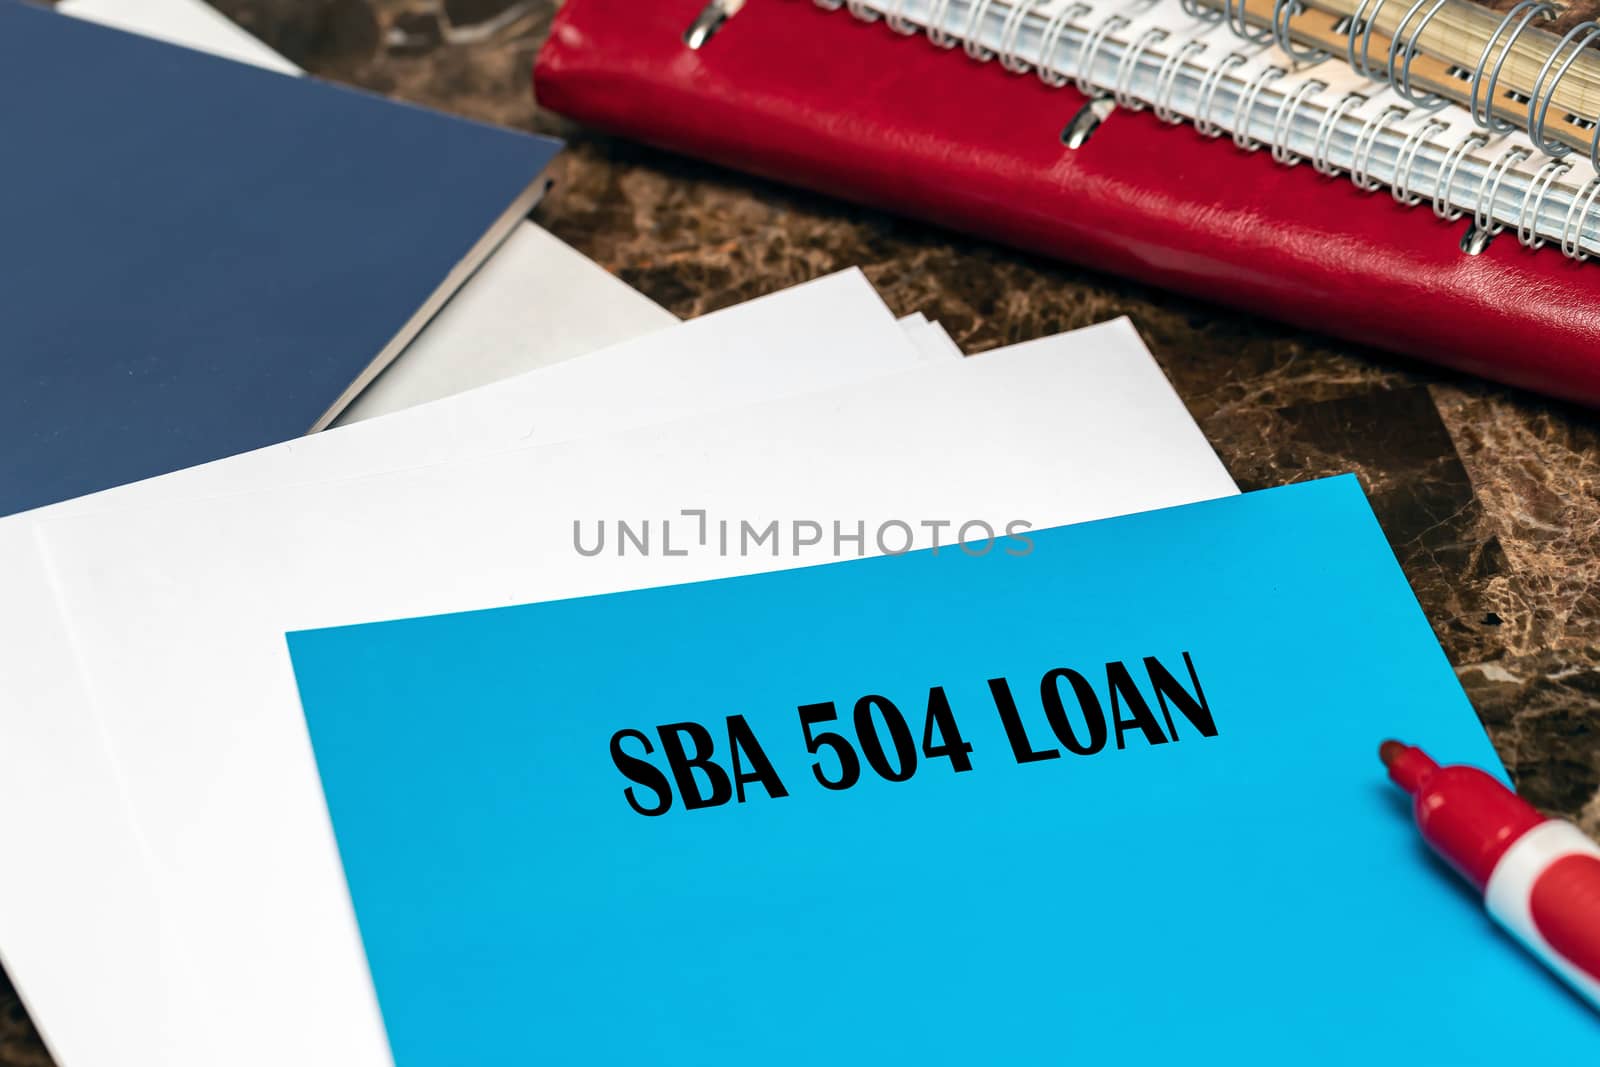 SBA 504 loans provide long-term financing to purchase real estate, equipment, and other fixed assets. by bonilook